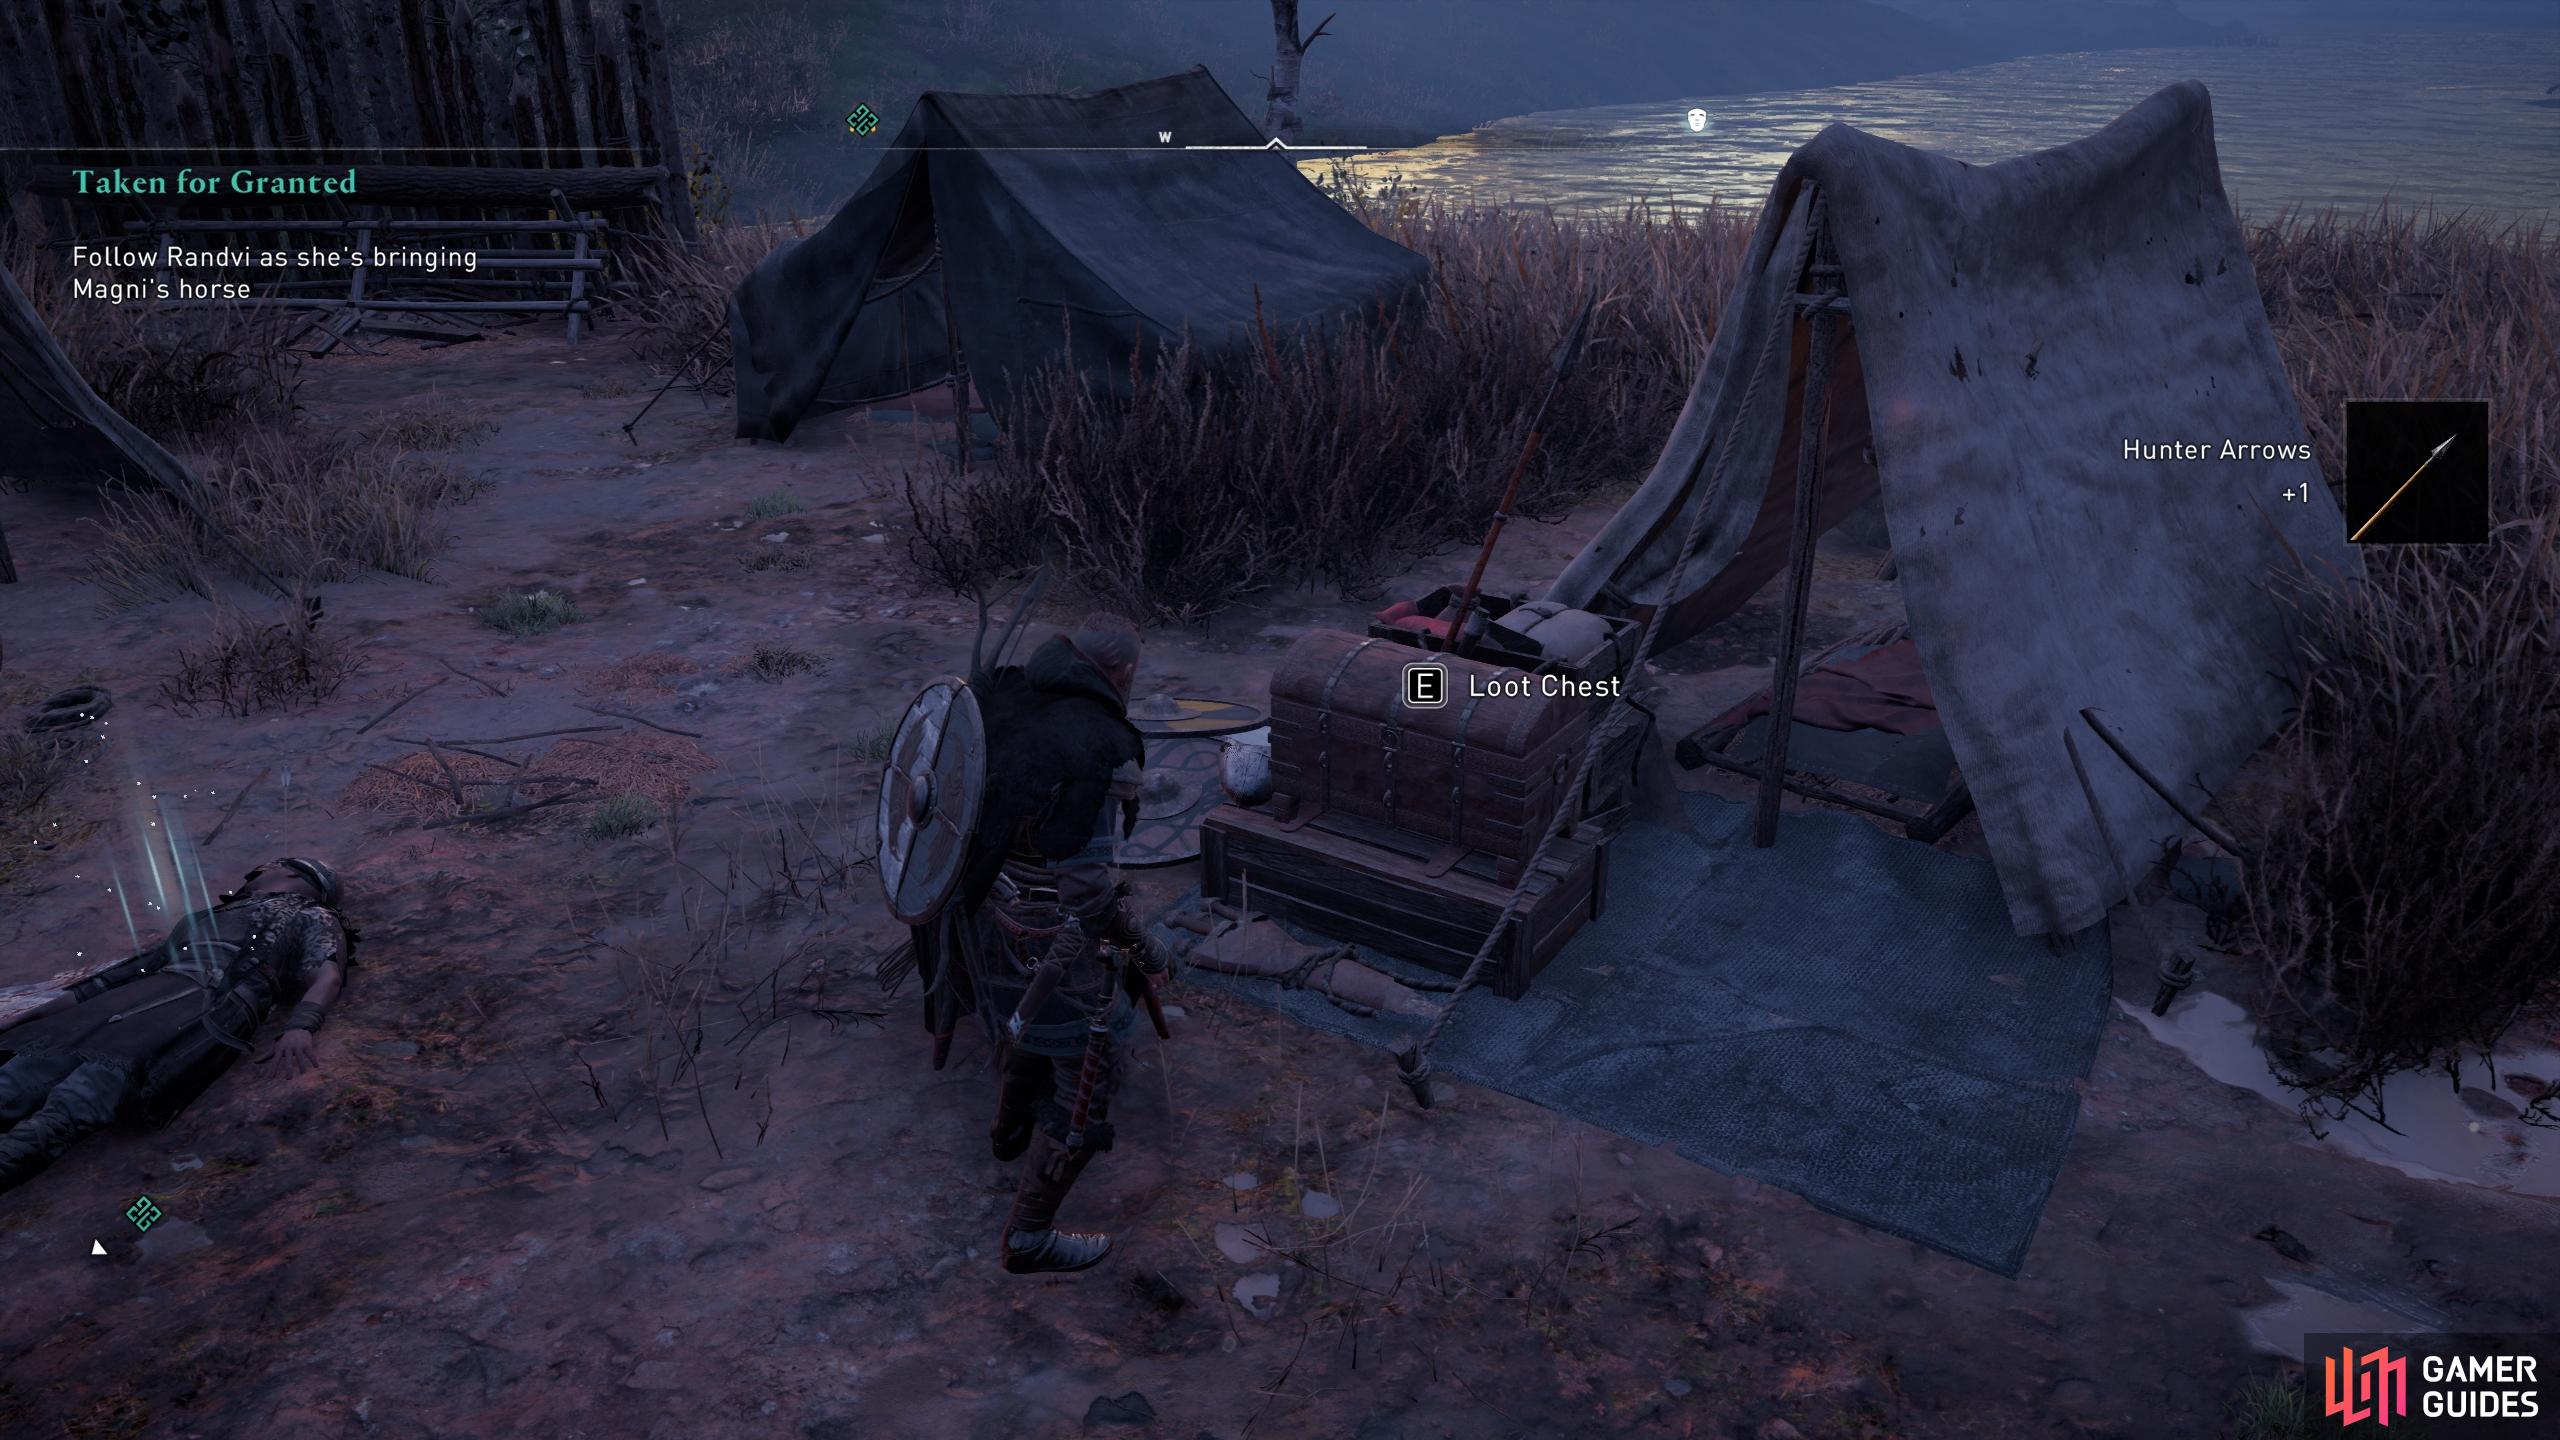 Be sure to loot the treasure chest before you leave the camp.